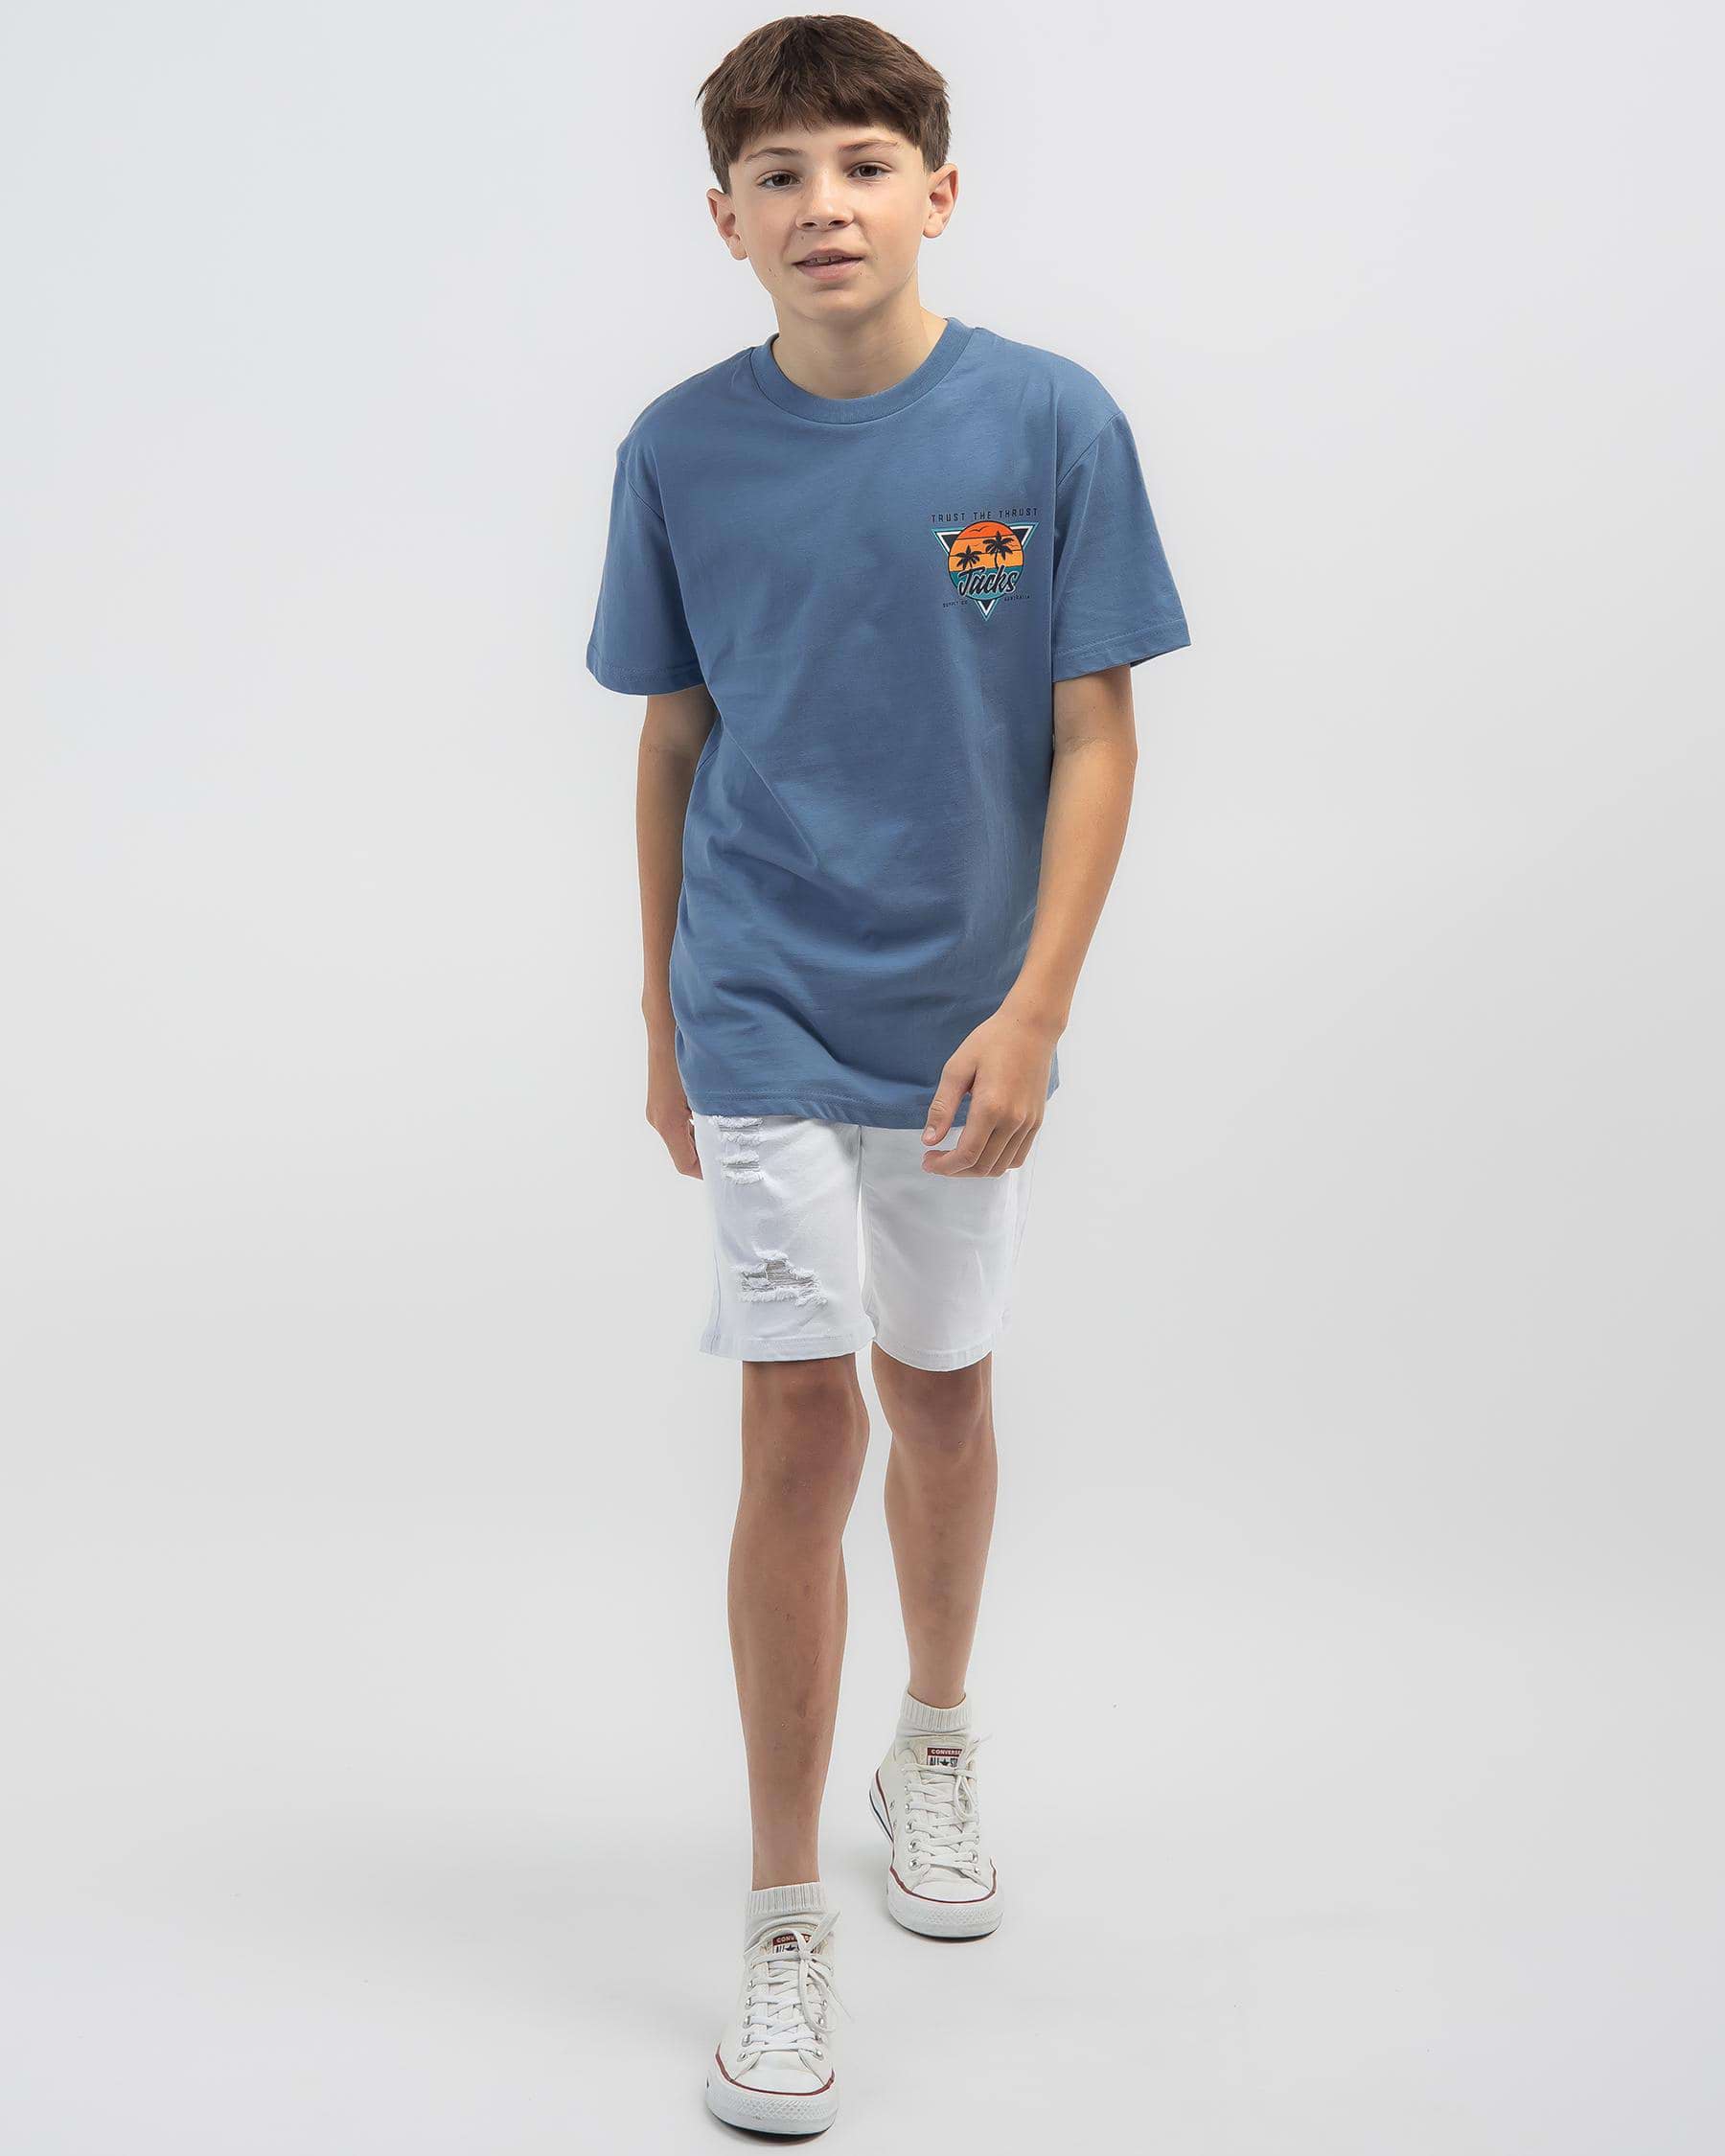 Shop Jacks Boys' Line Up T-Shirt In Slate Blue - Fast Shipping & Easy ...